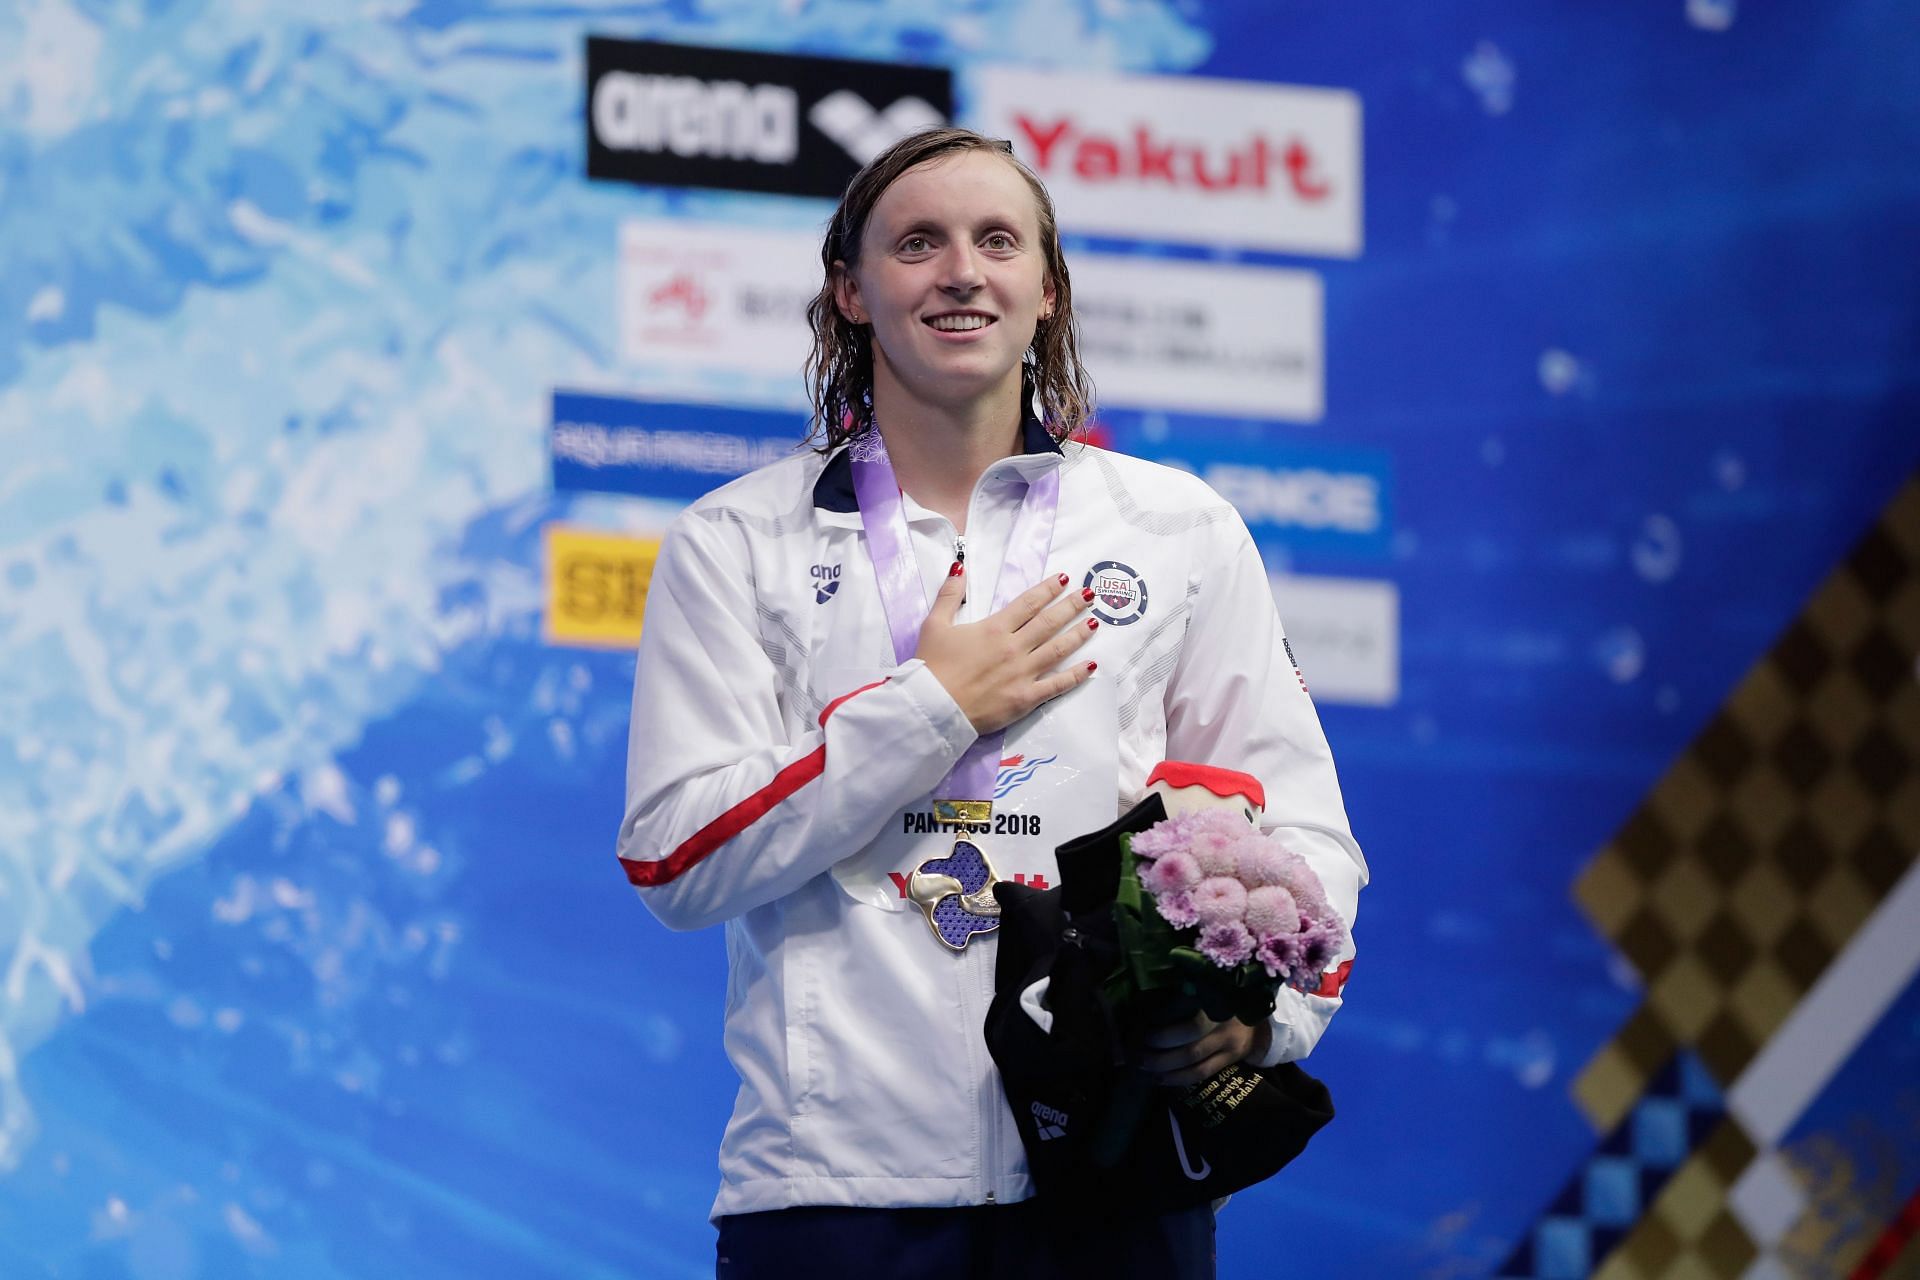 Katie Ledecky during the 2018 Pan Pacific Swimming Championships